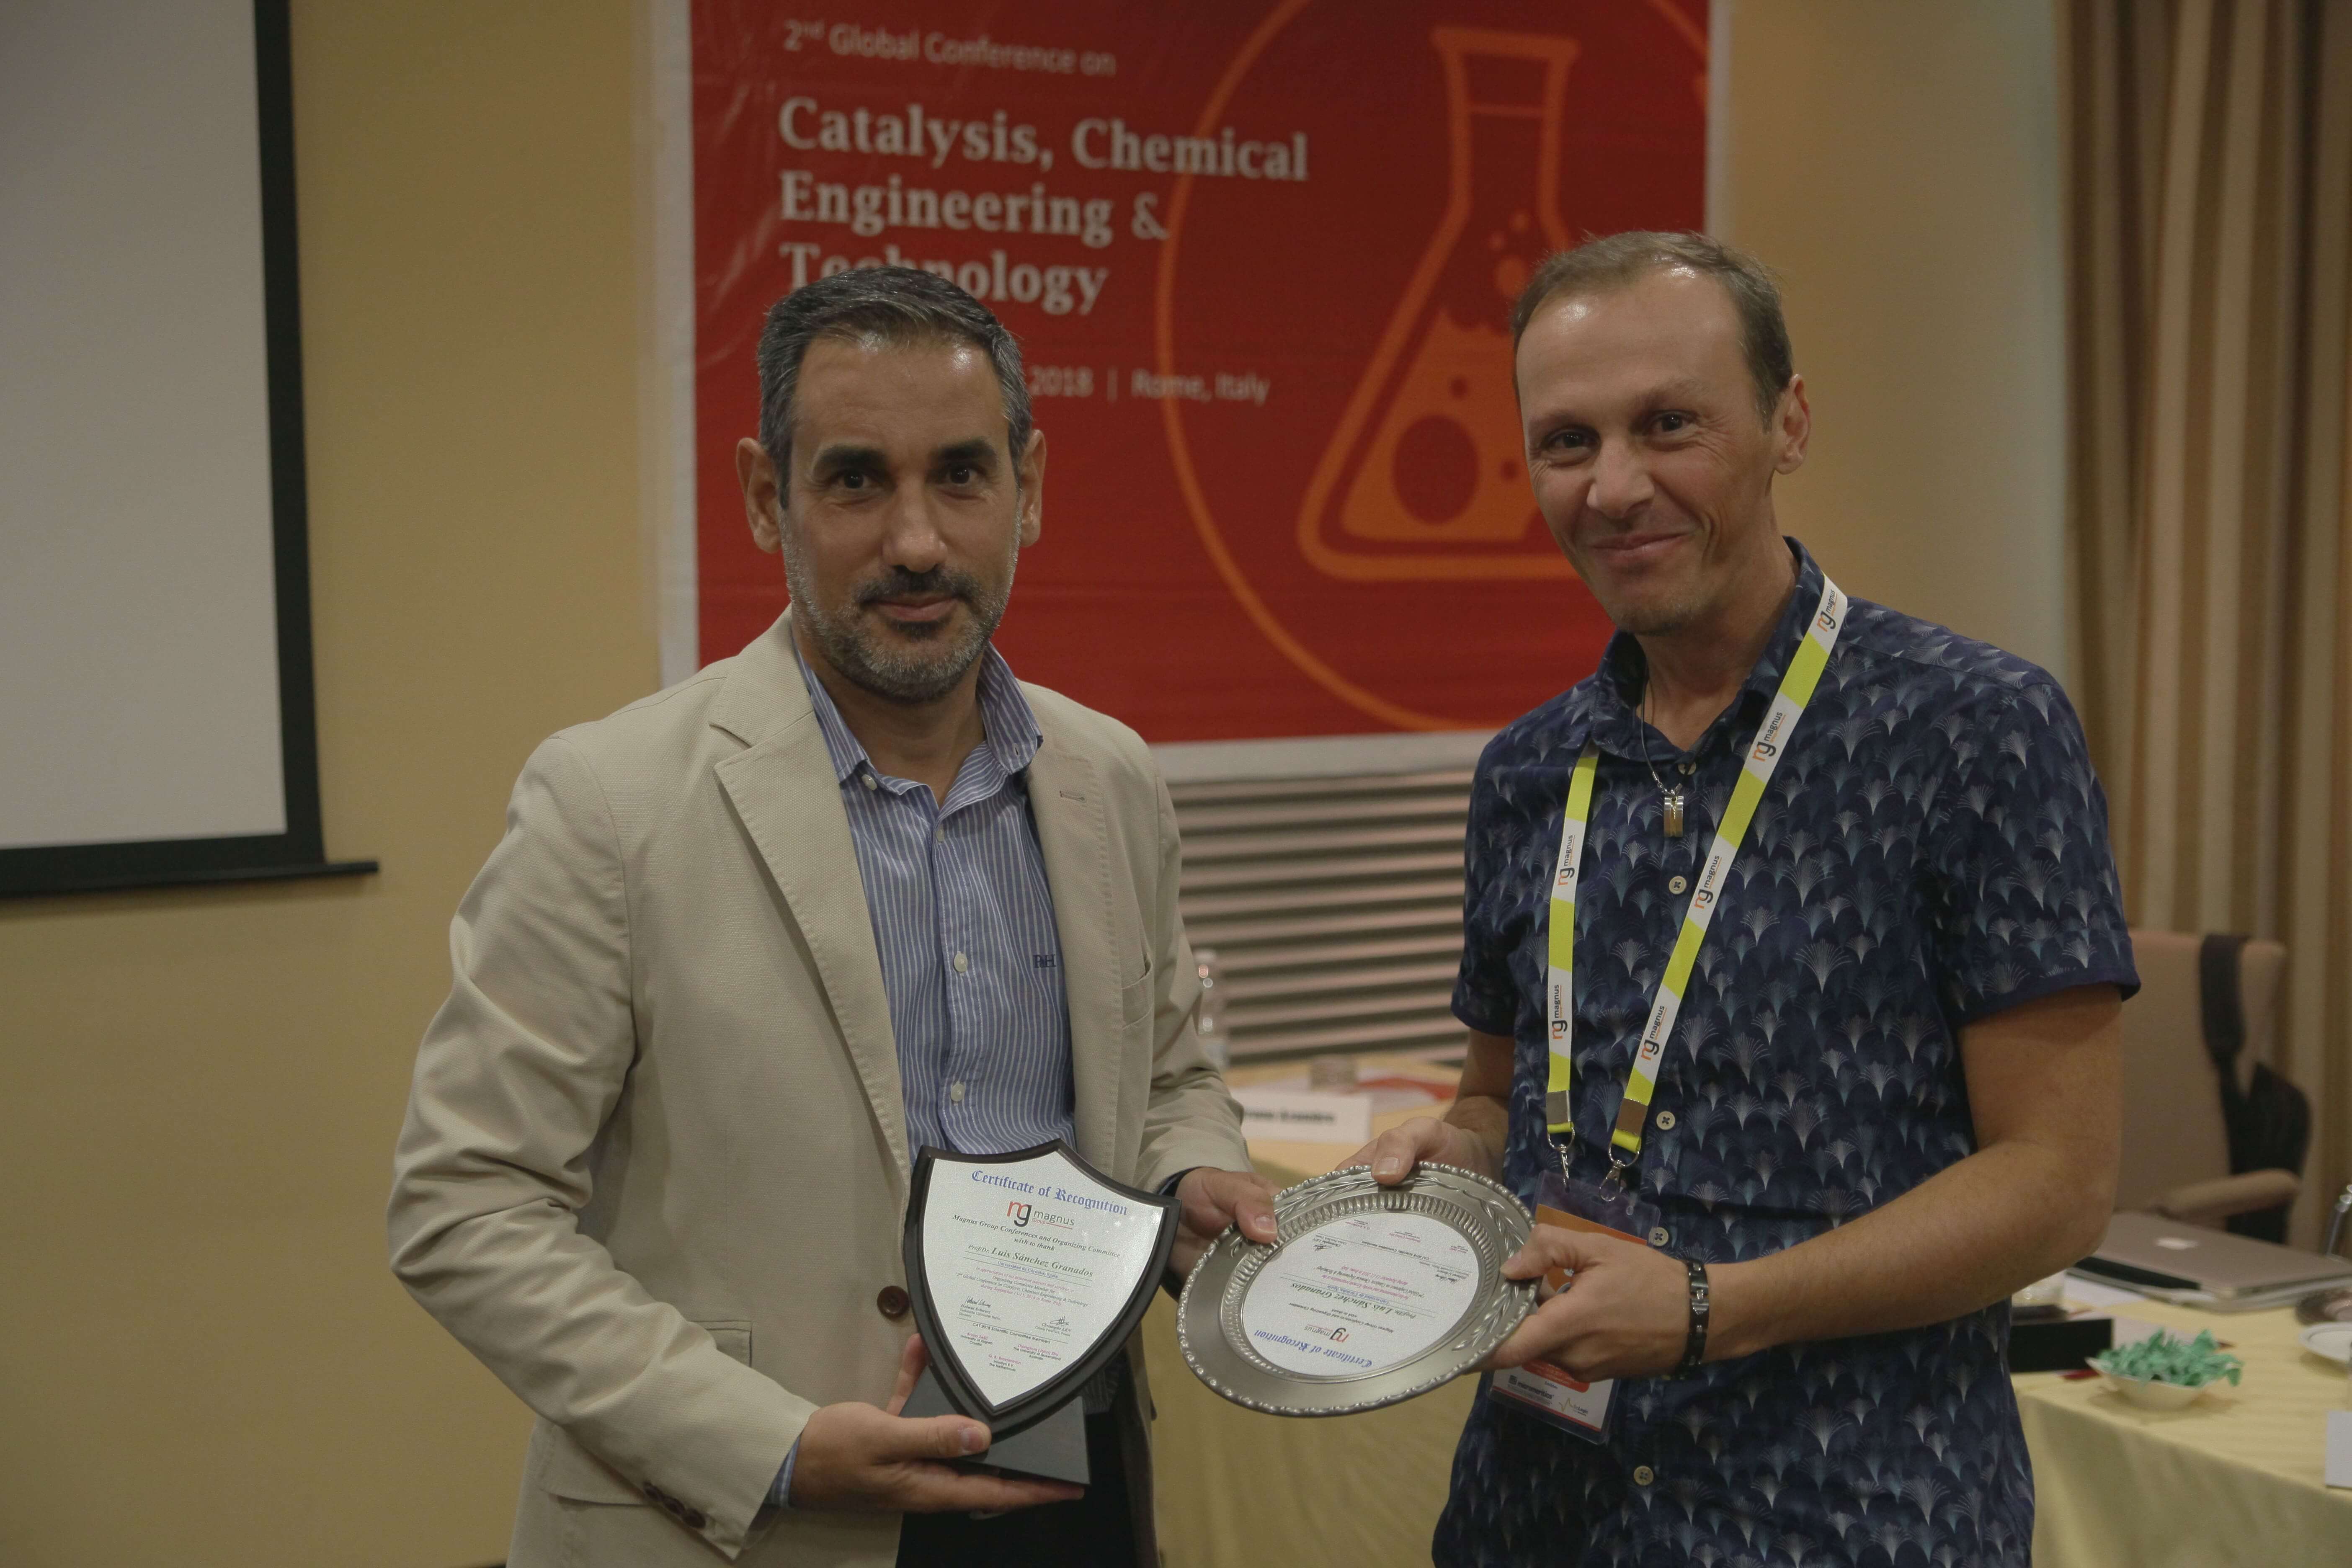 Catalysis conferences